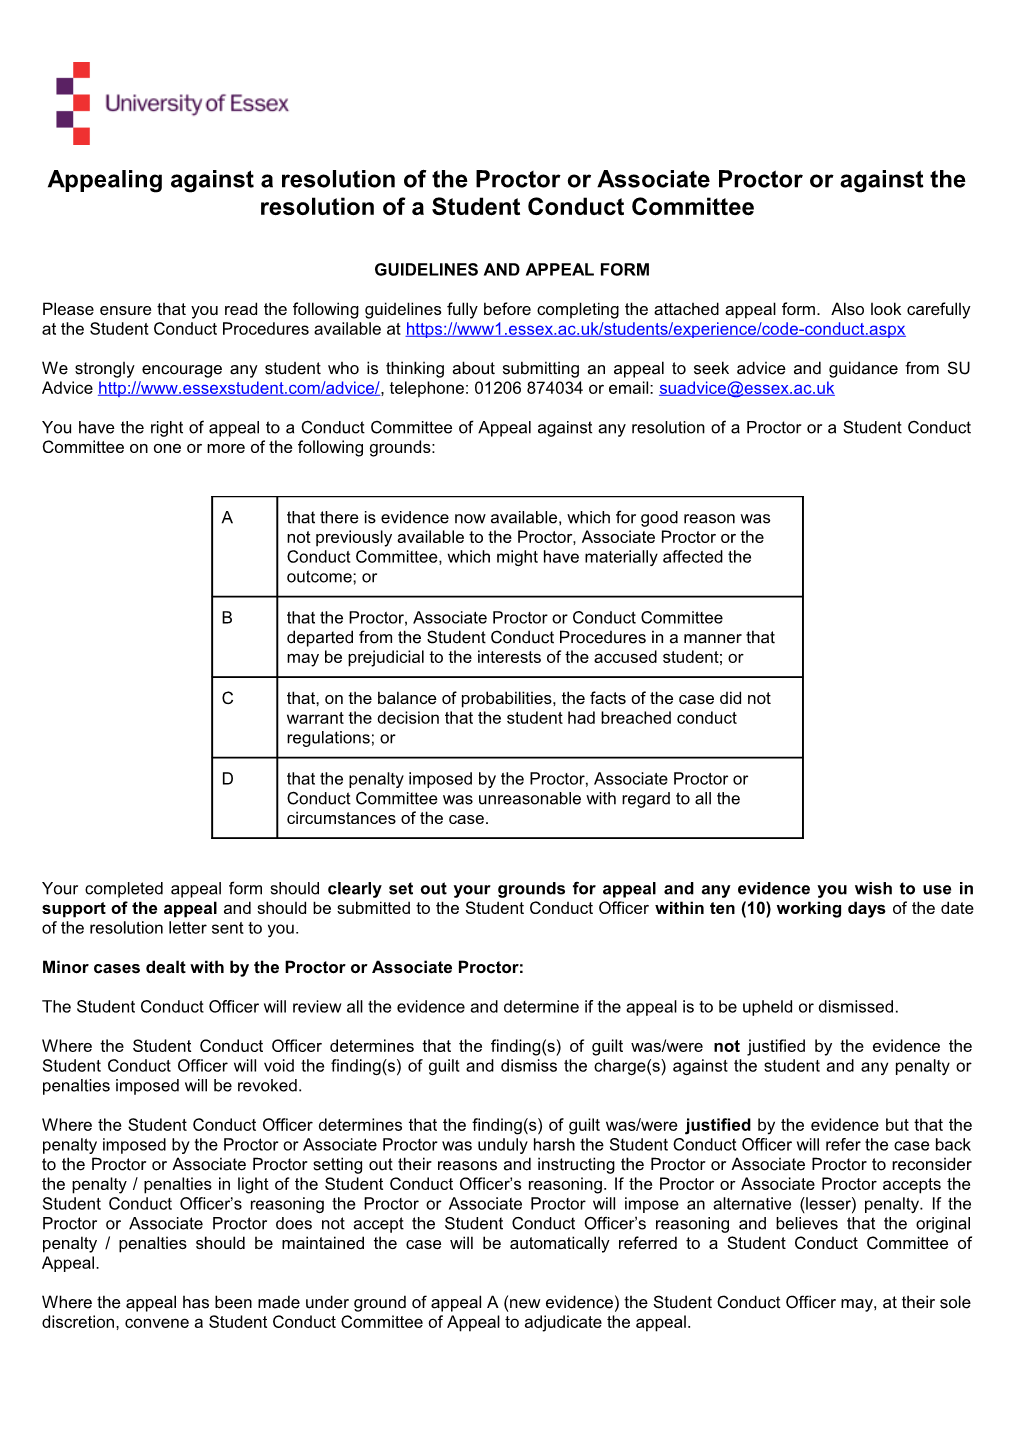 Guidelines and Appeal Form